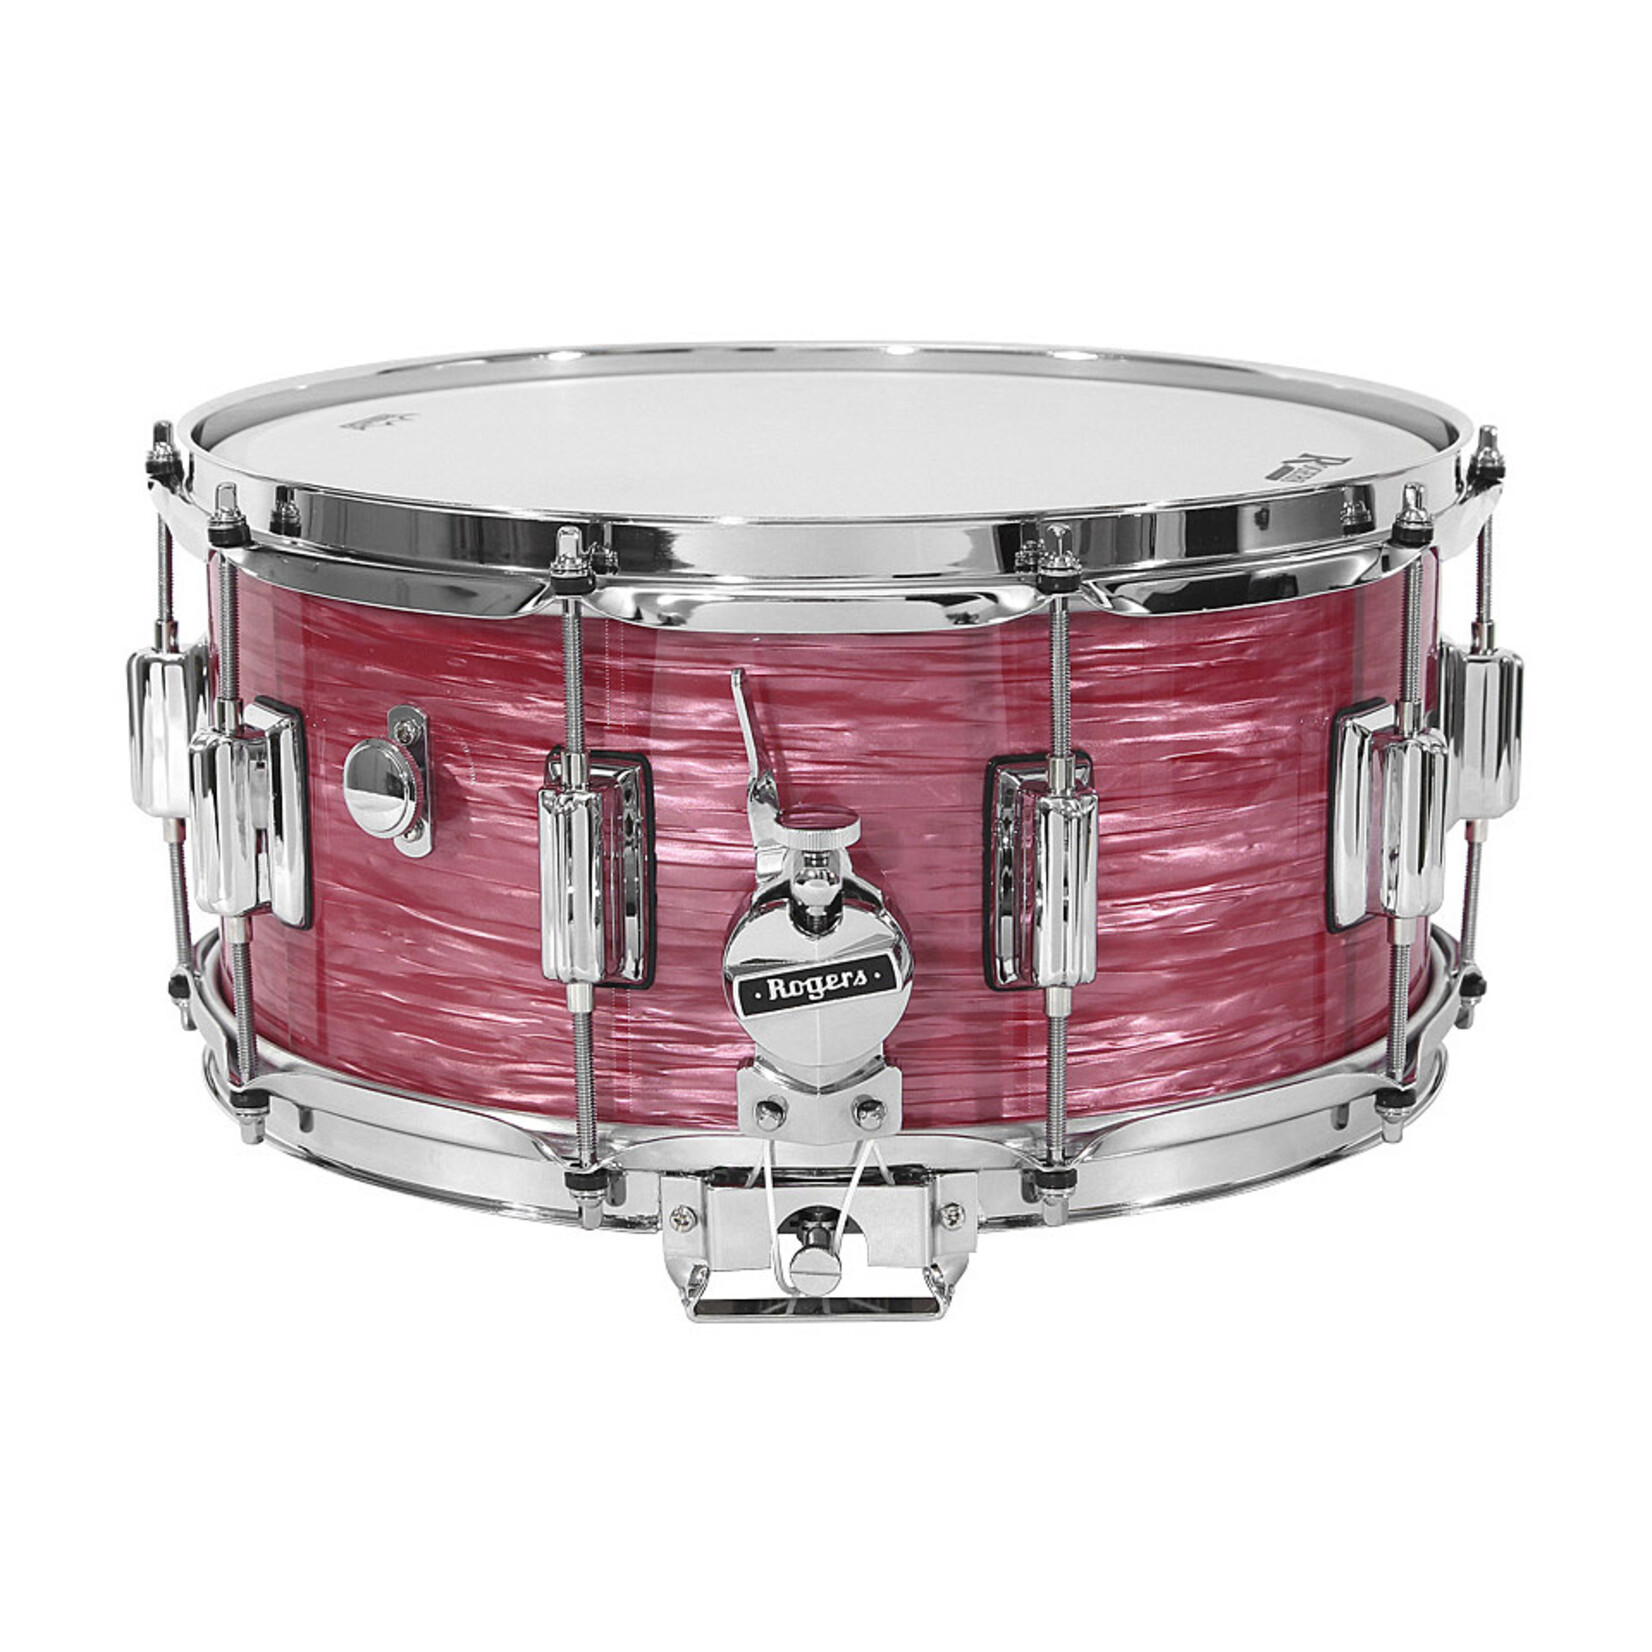 Rogers Rogers Dyna-sonic 6.5x14 Wood Shell Snare Drum  Red Ripple Beavertail